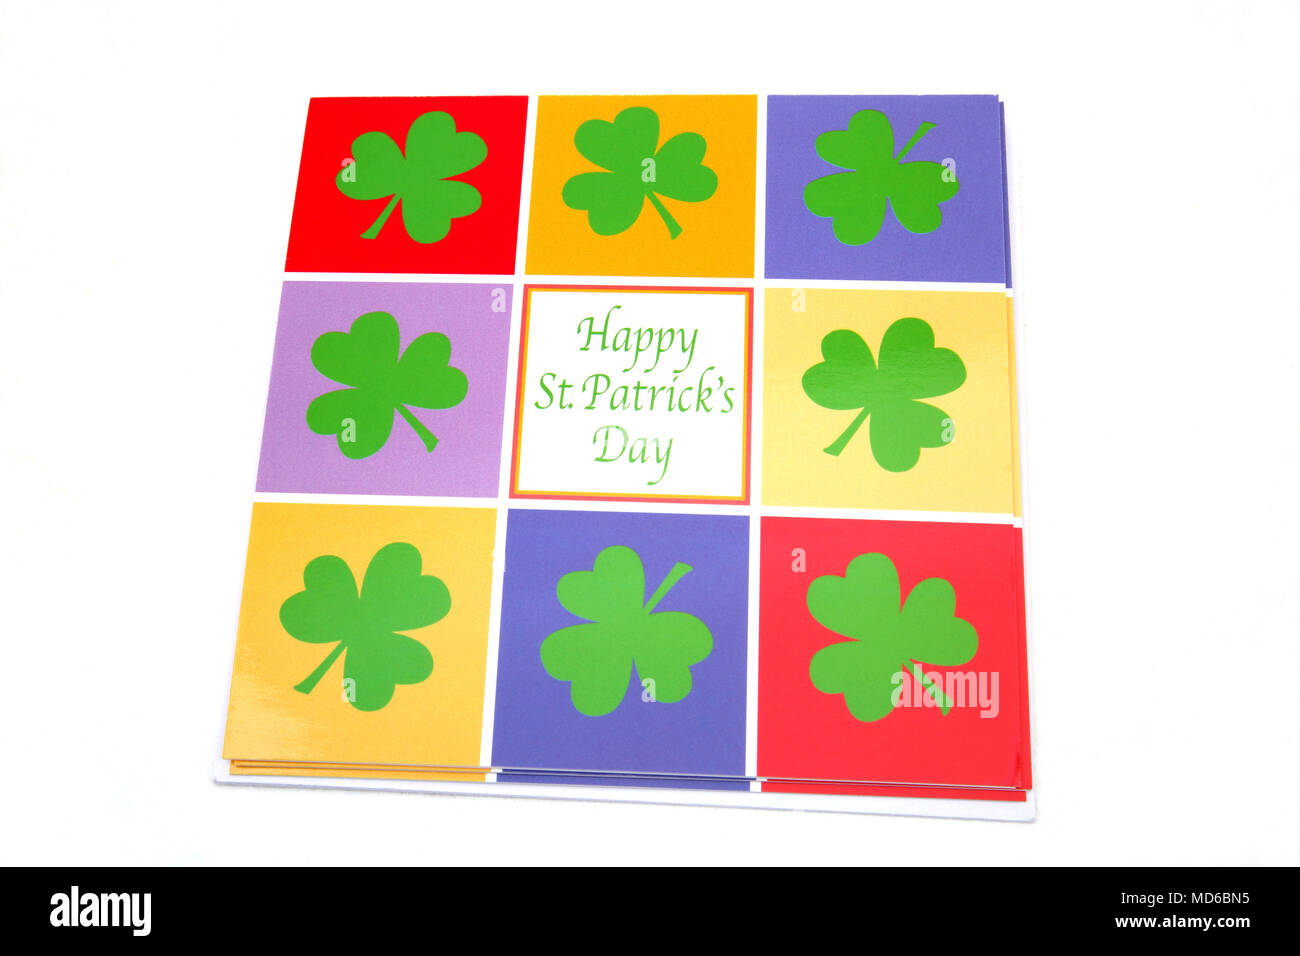 Happy St Patrick's Day Card Banque D'Images